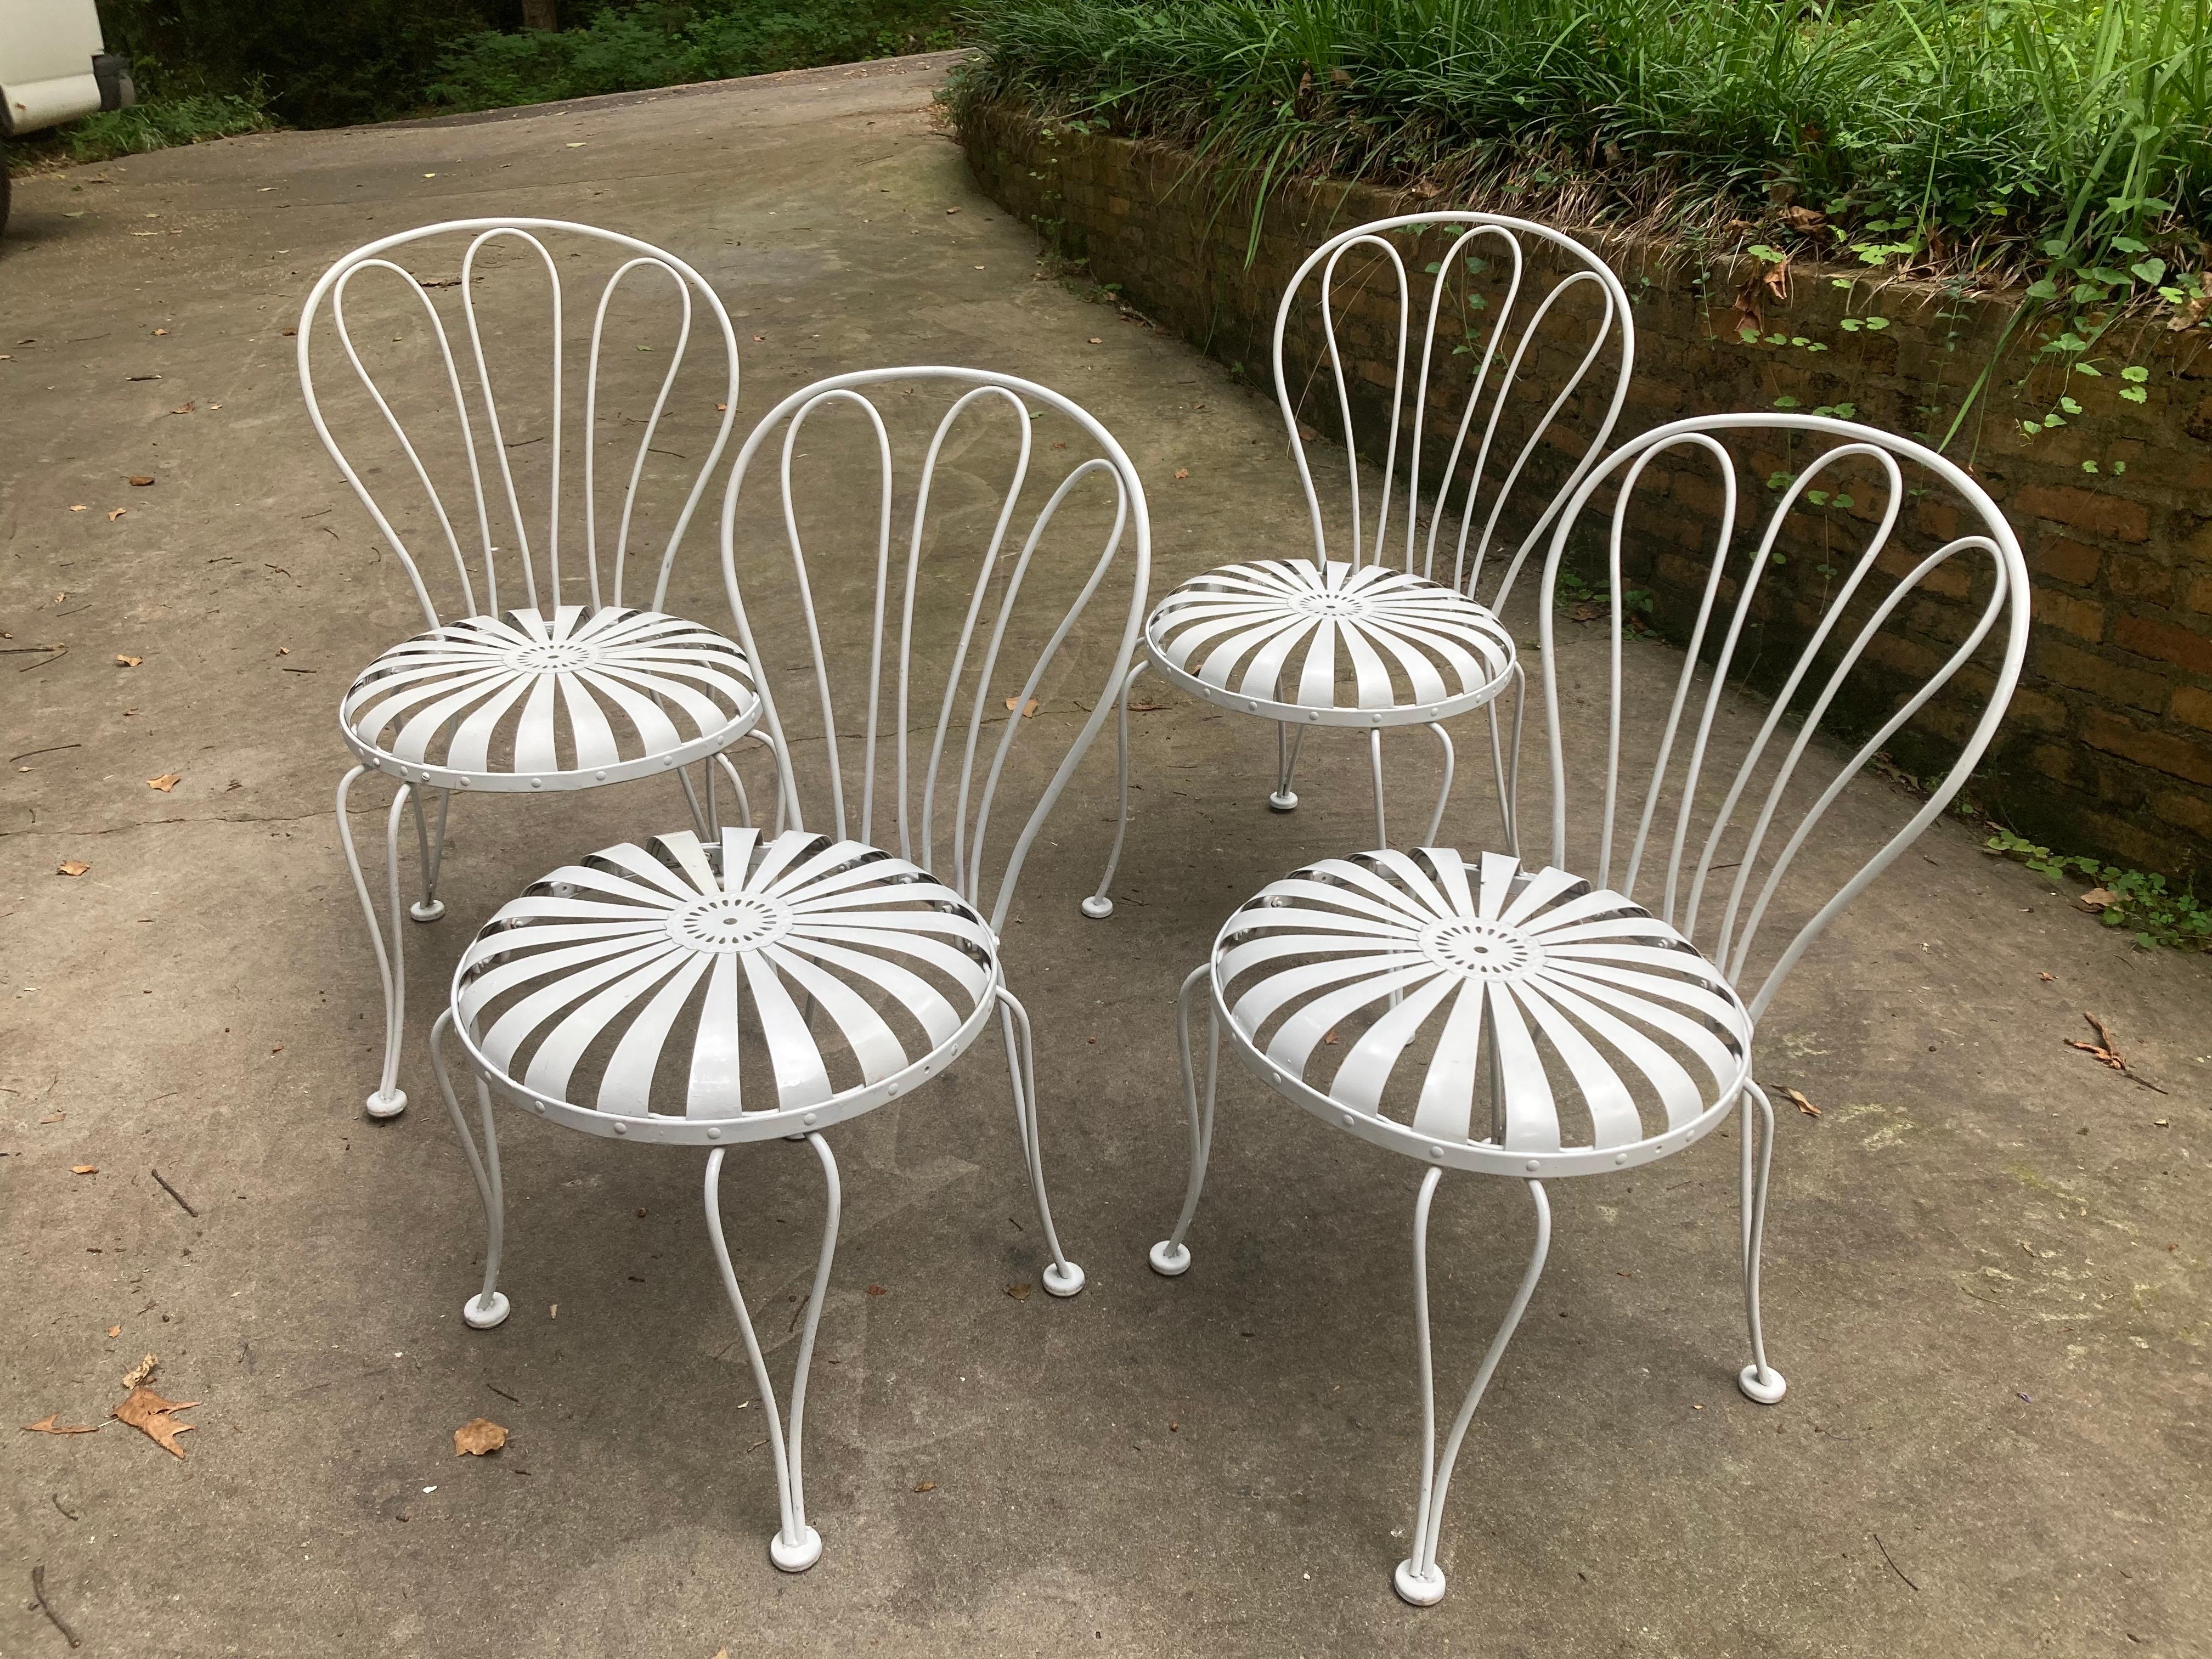 French francois carre garden chairs -
set of 4 For Sale